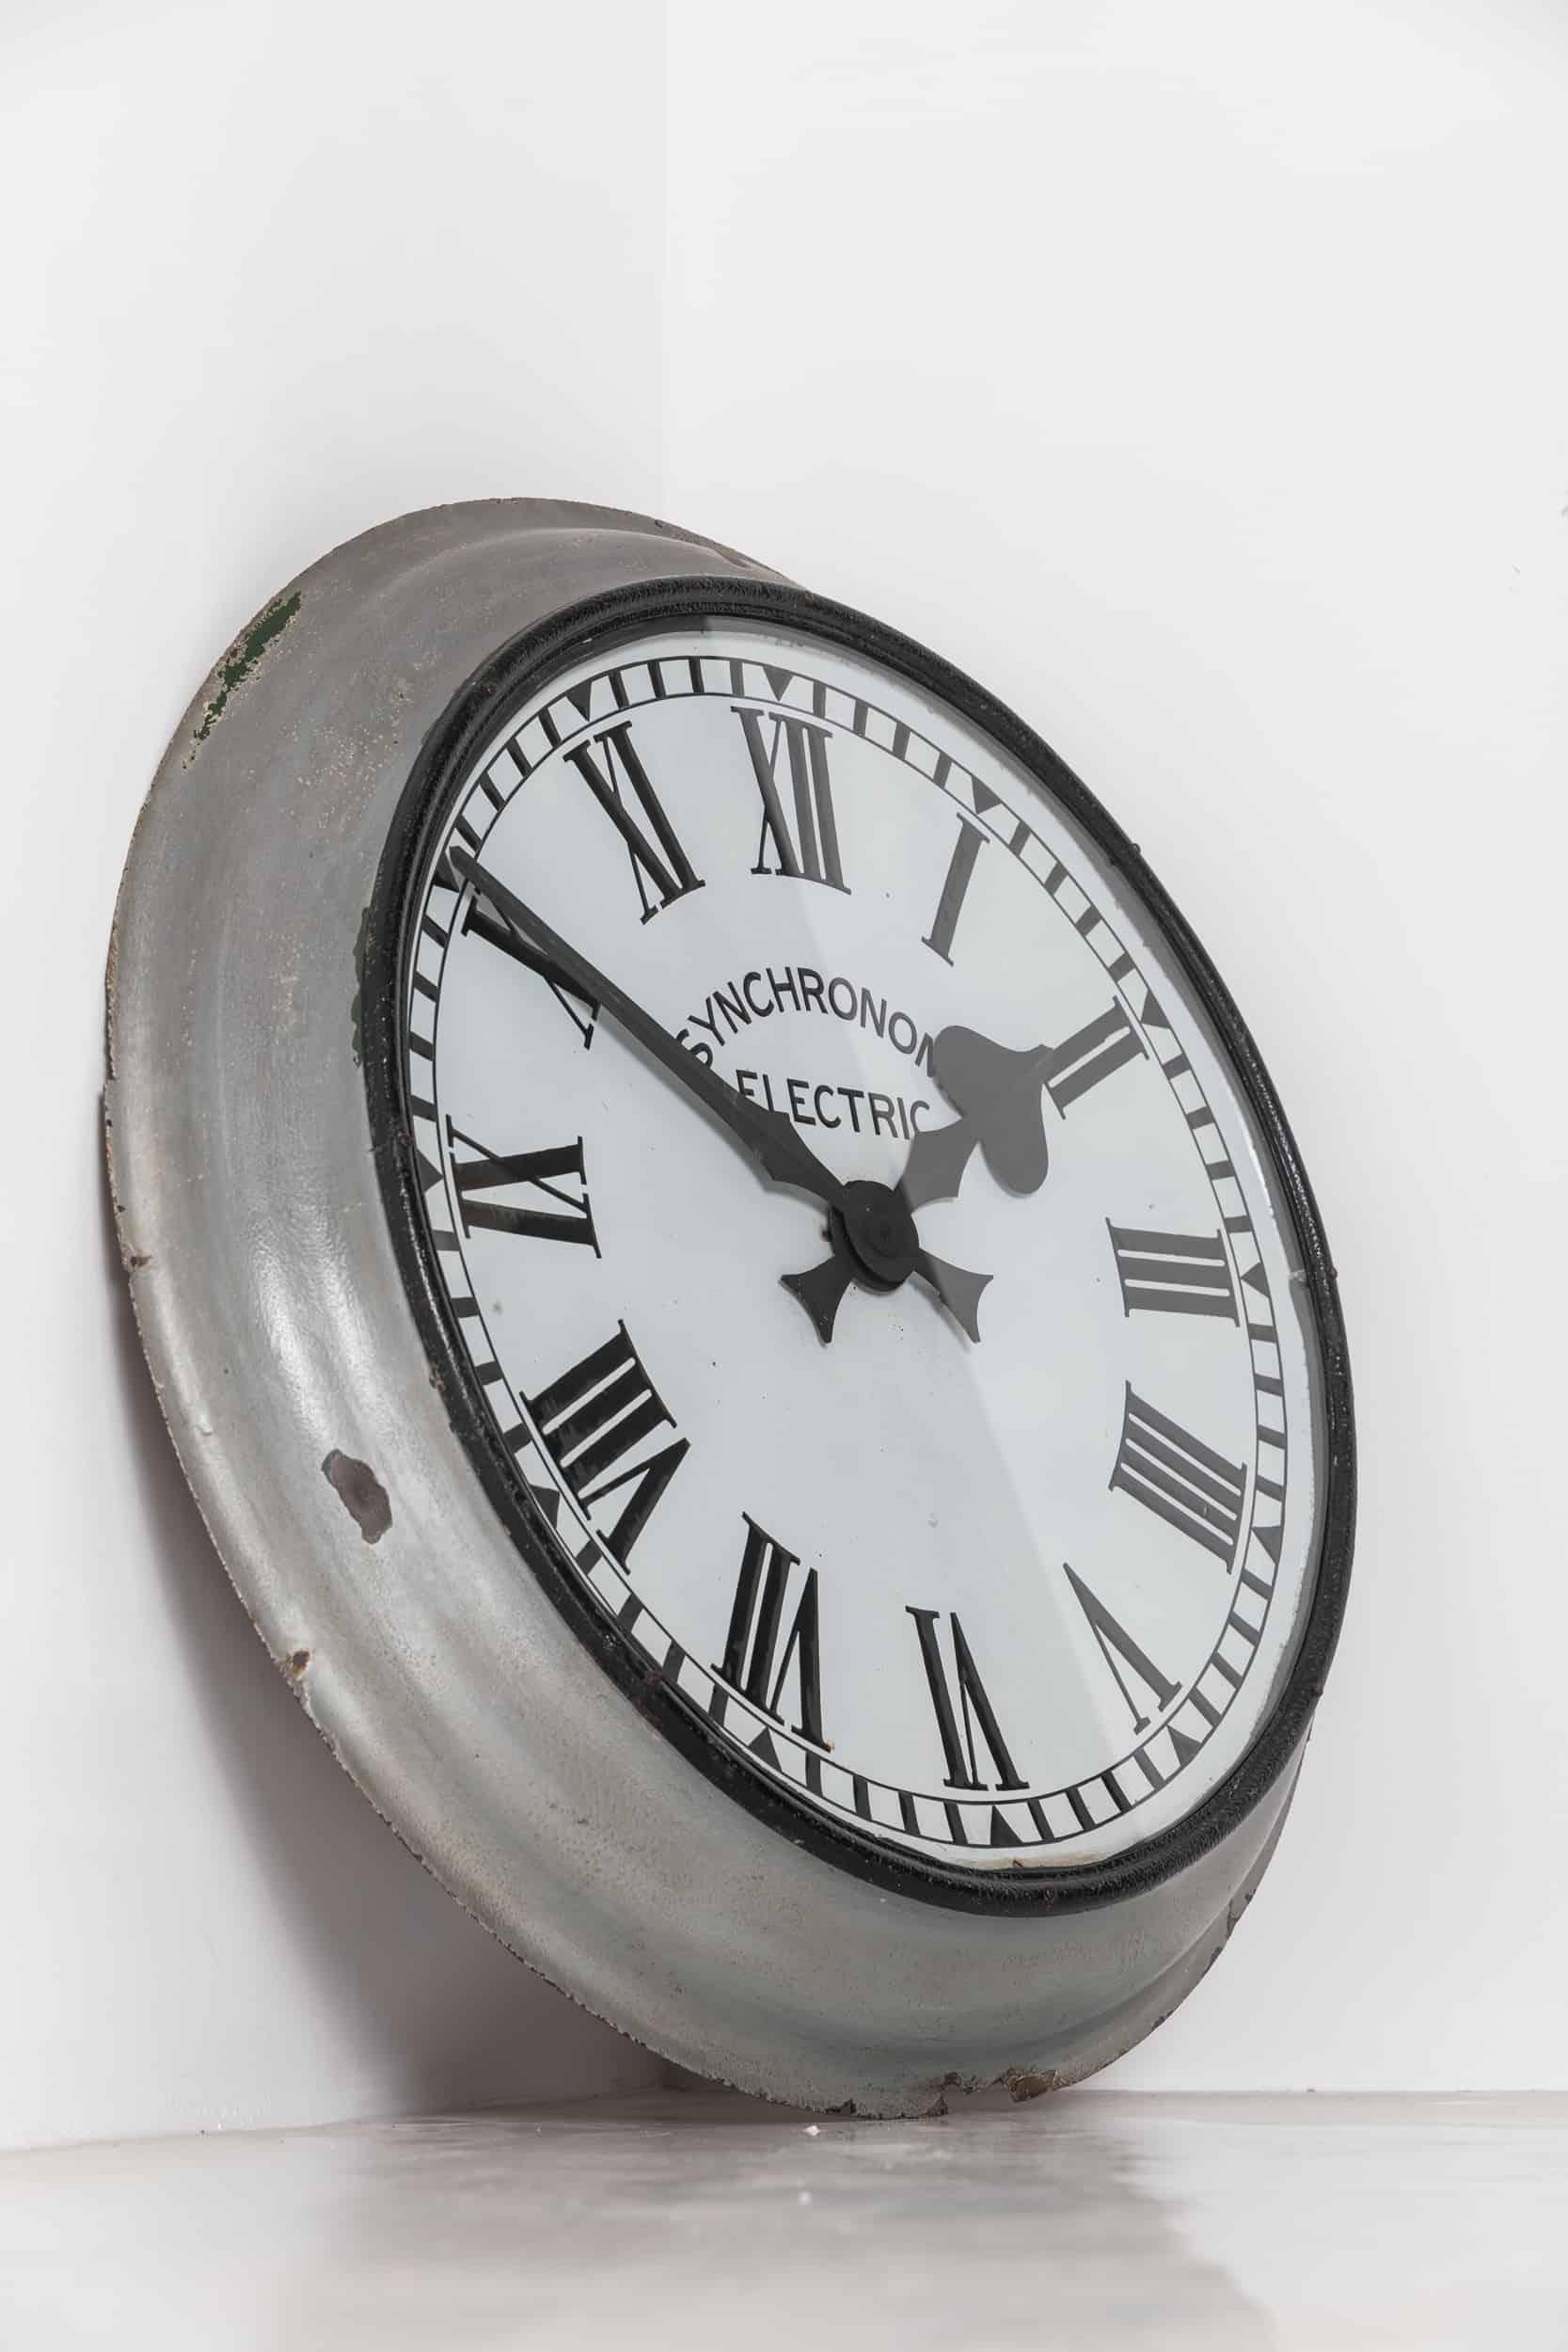 Huge enamel wall clock made in England by Synchronome. c.1930.

All in one design made entirely of enameled steel with later grey/silver paint, and dial bearing the makers mark and Roman numerals. Some chipping to the outside edge as to be